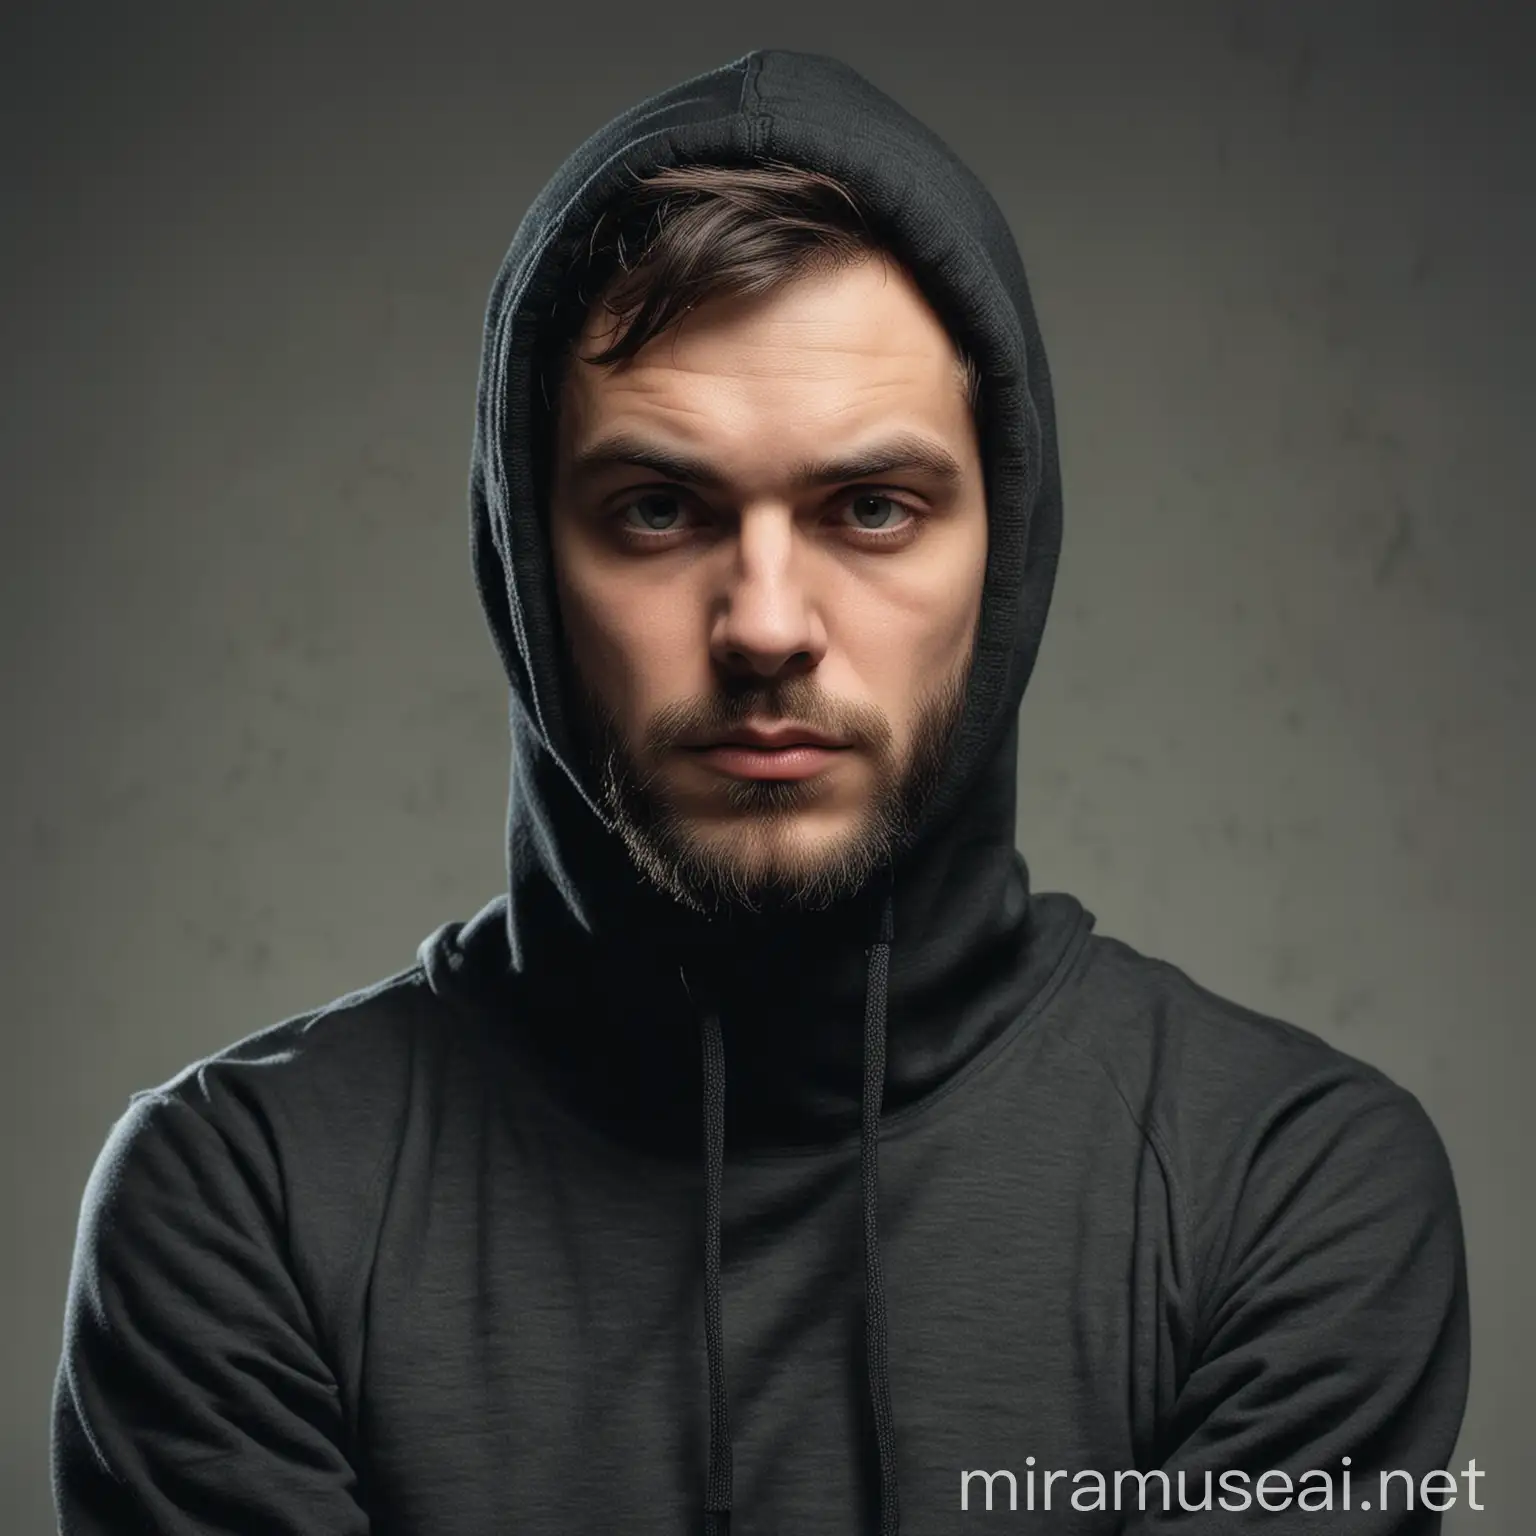 Serious Man in Hoodie and Balaclava Contemplating